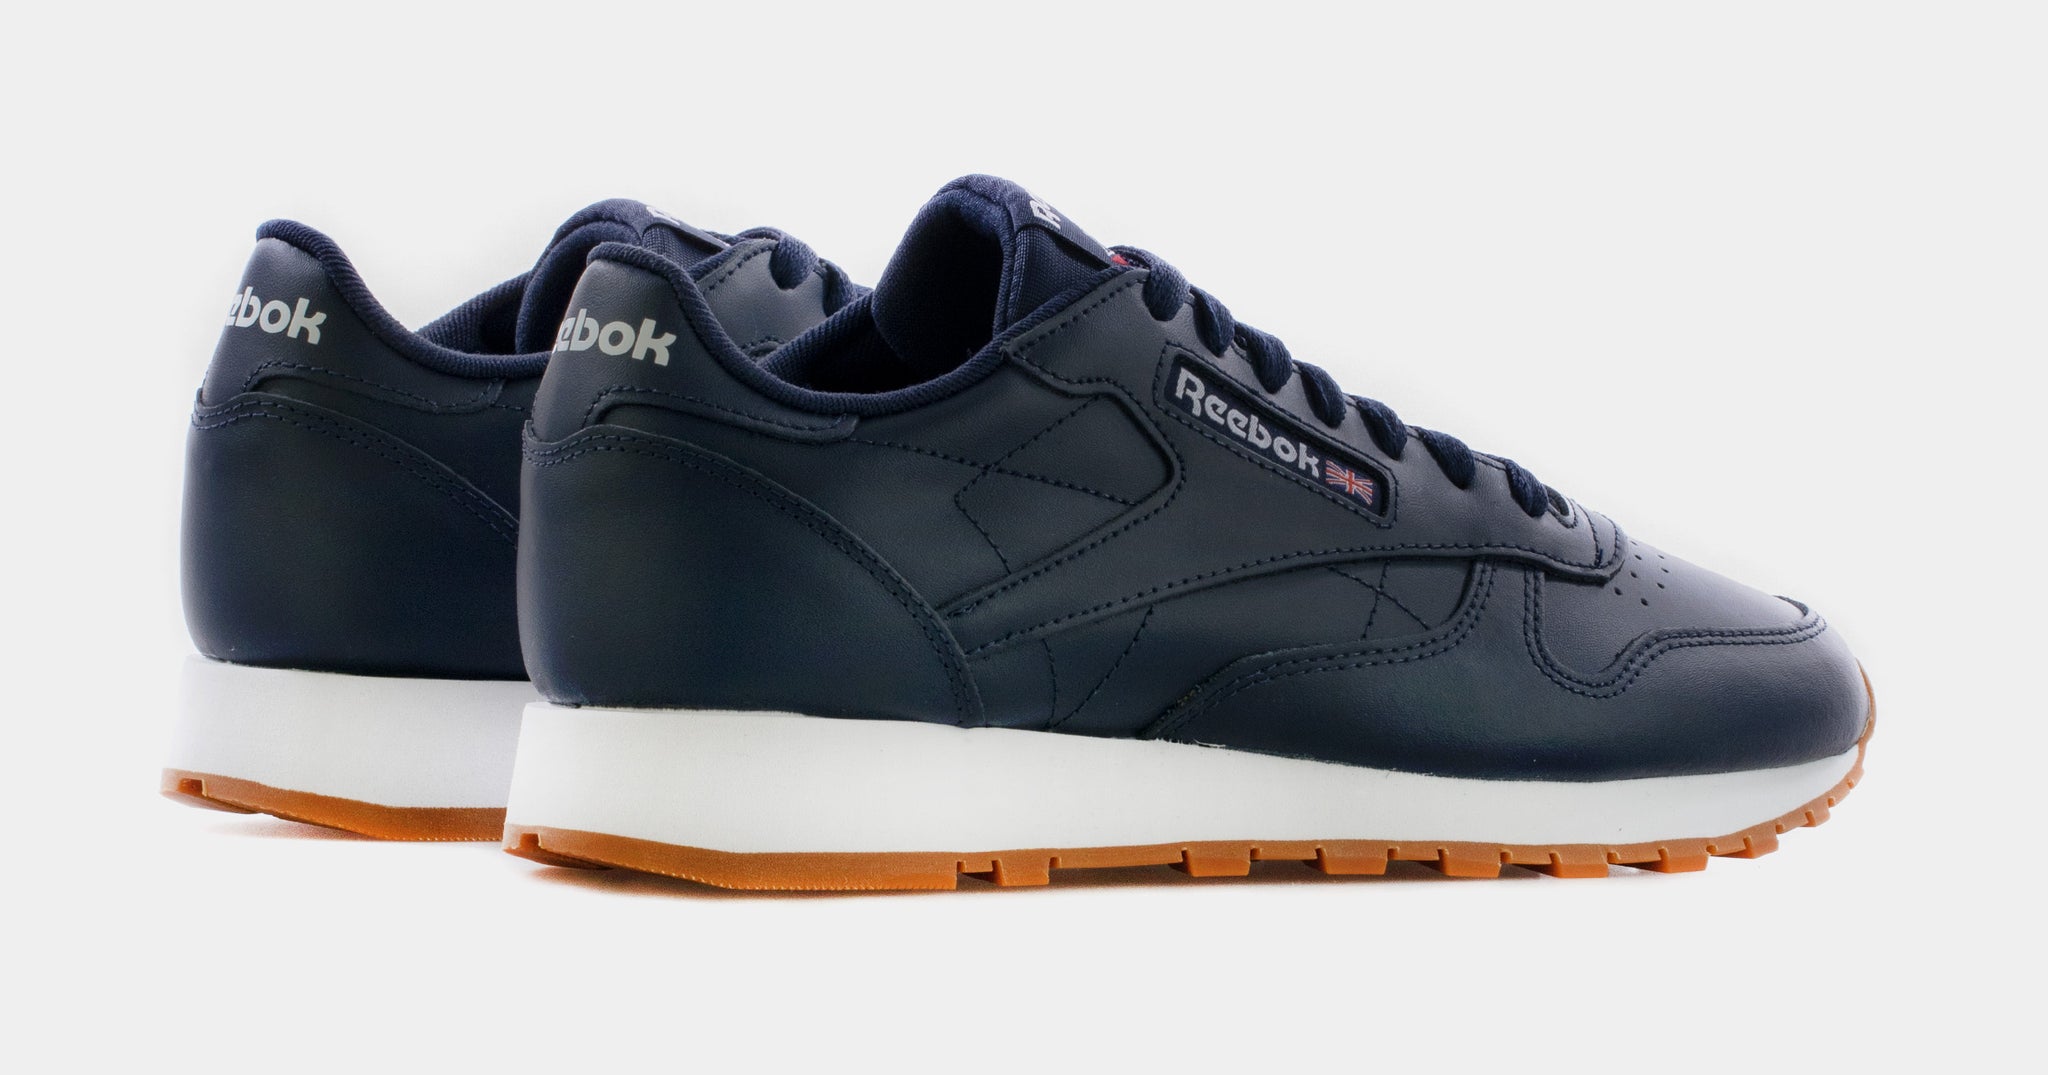 Reebok Classic Leather Mens Lifestyle Shoes Navy Blue GY3600 – Shoe Palace